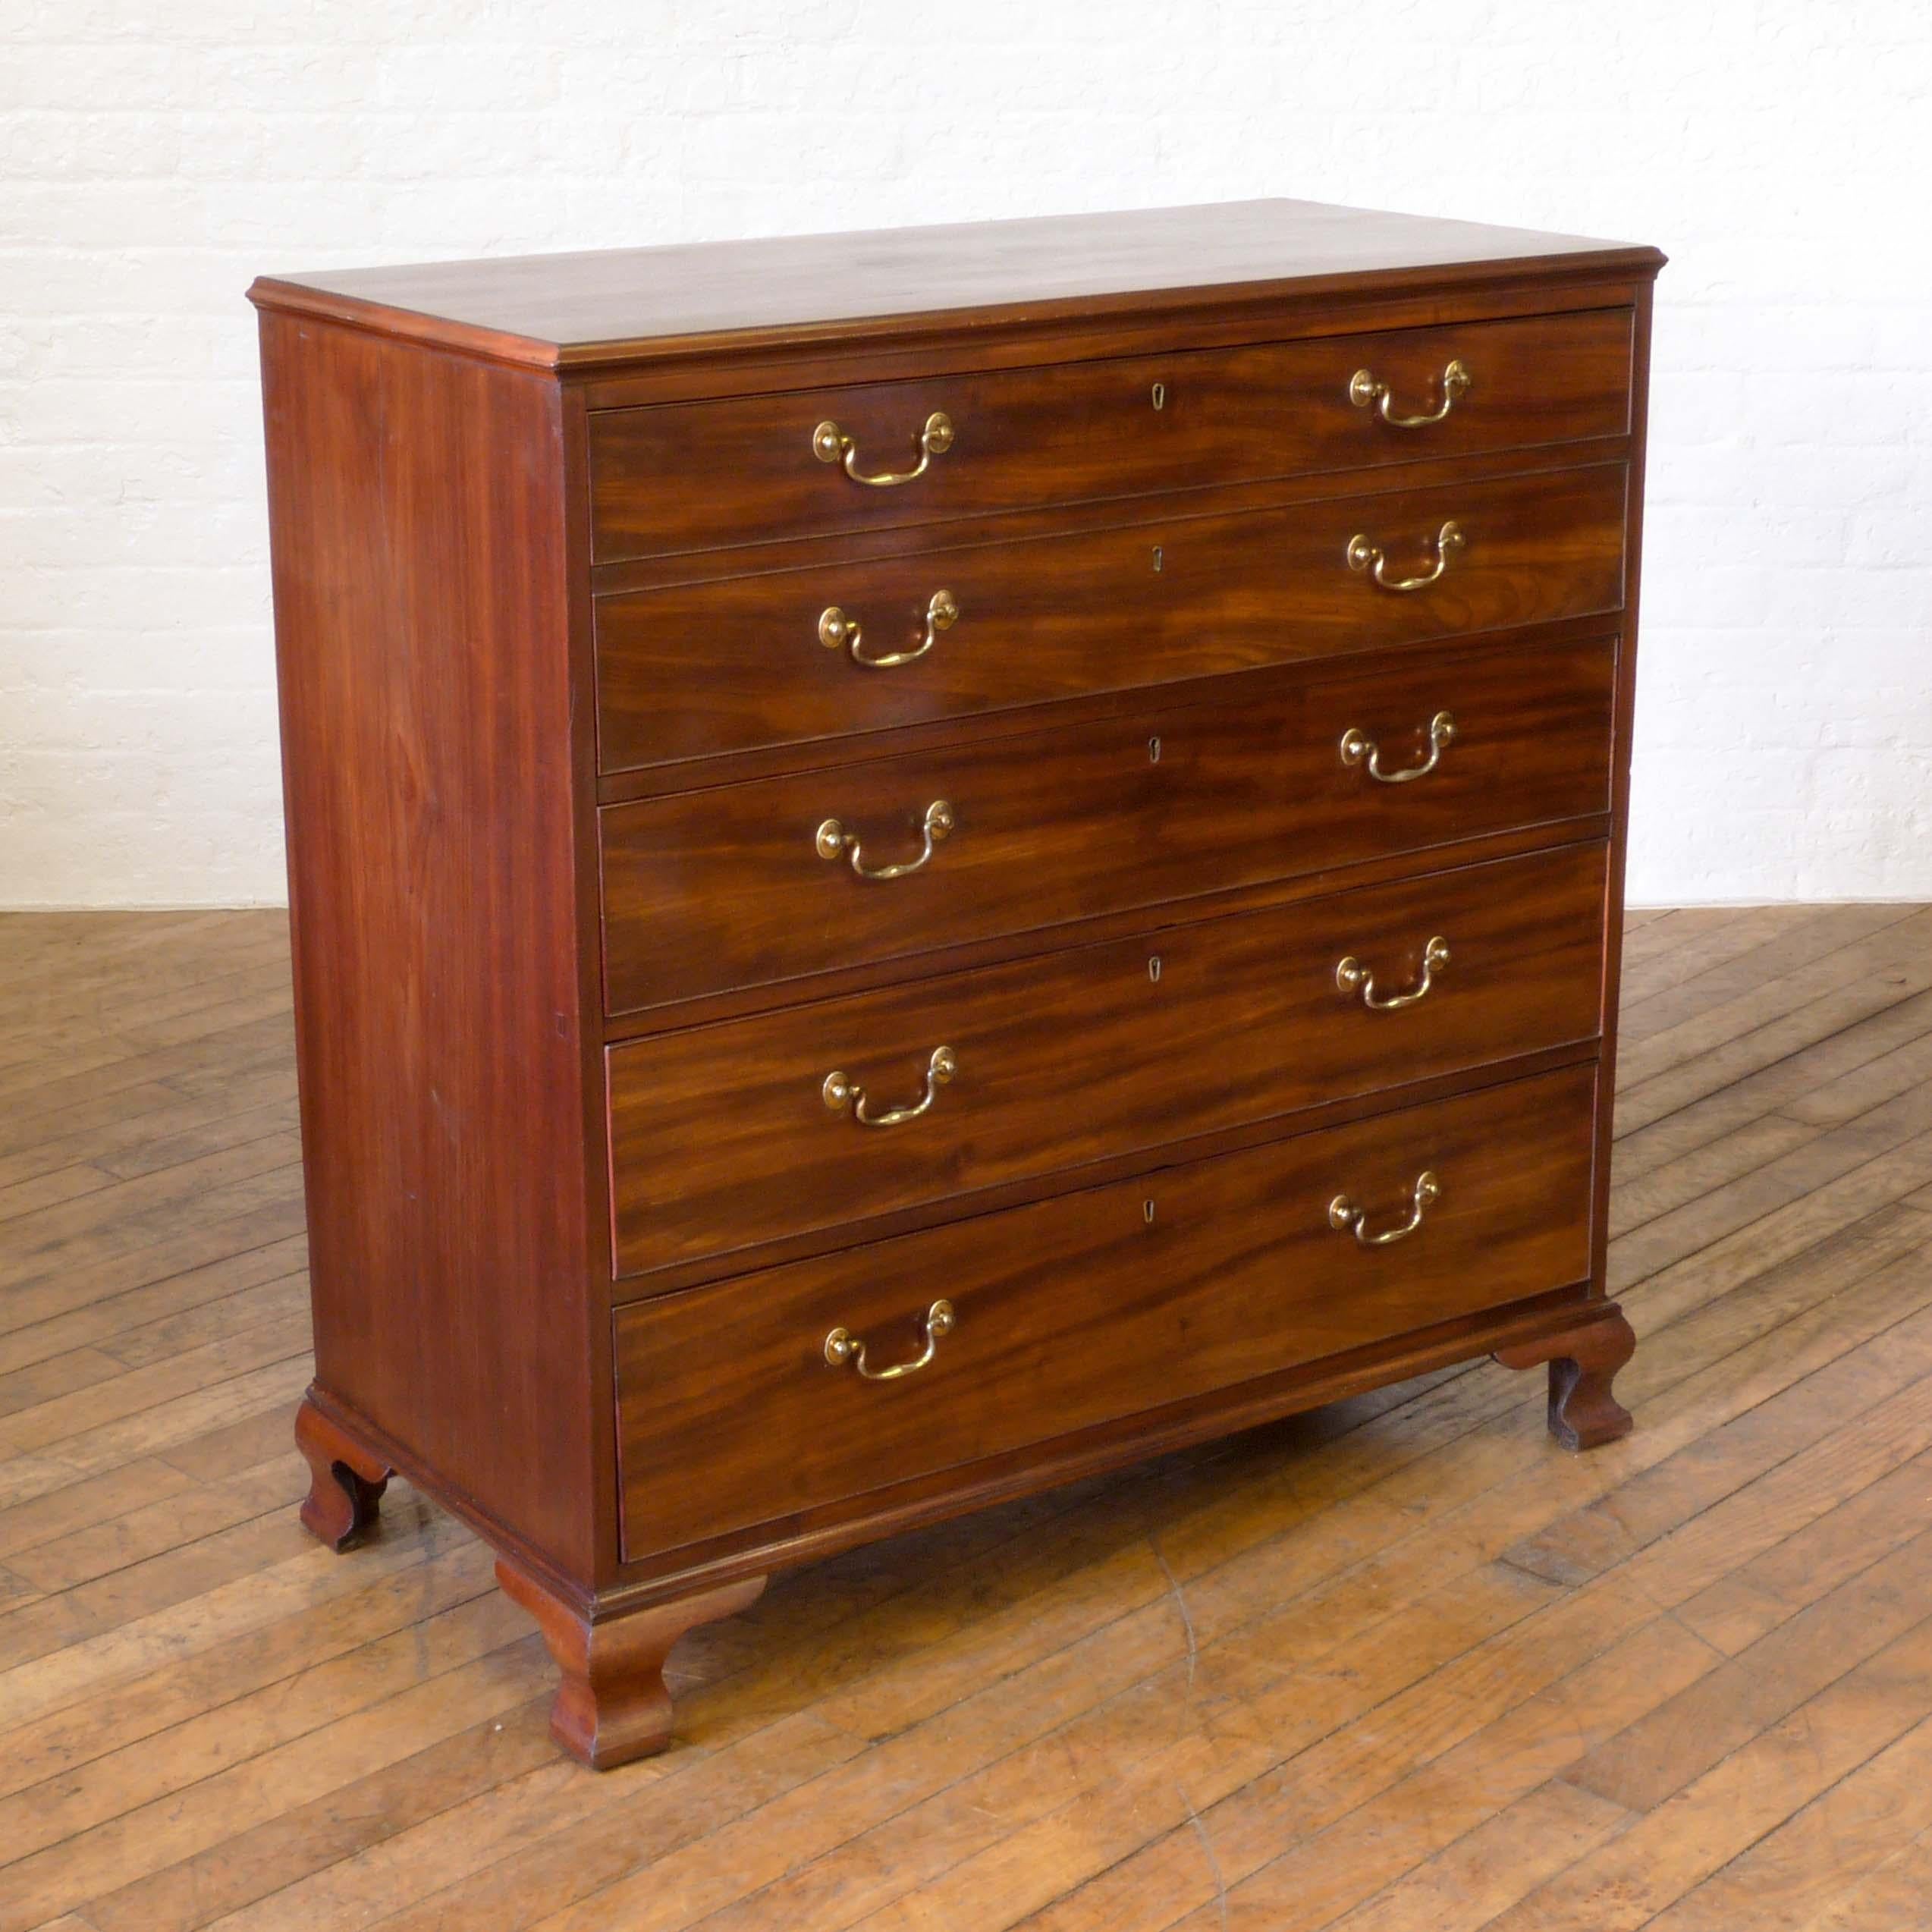 A fine George 3rd mahogany secretaire chest of drawers in super competition for it's 200+ years. Giving the appearance of a five drawer chest of drawers, the top two are actually the secretaire with three long drawers underneath. From the original